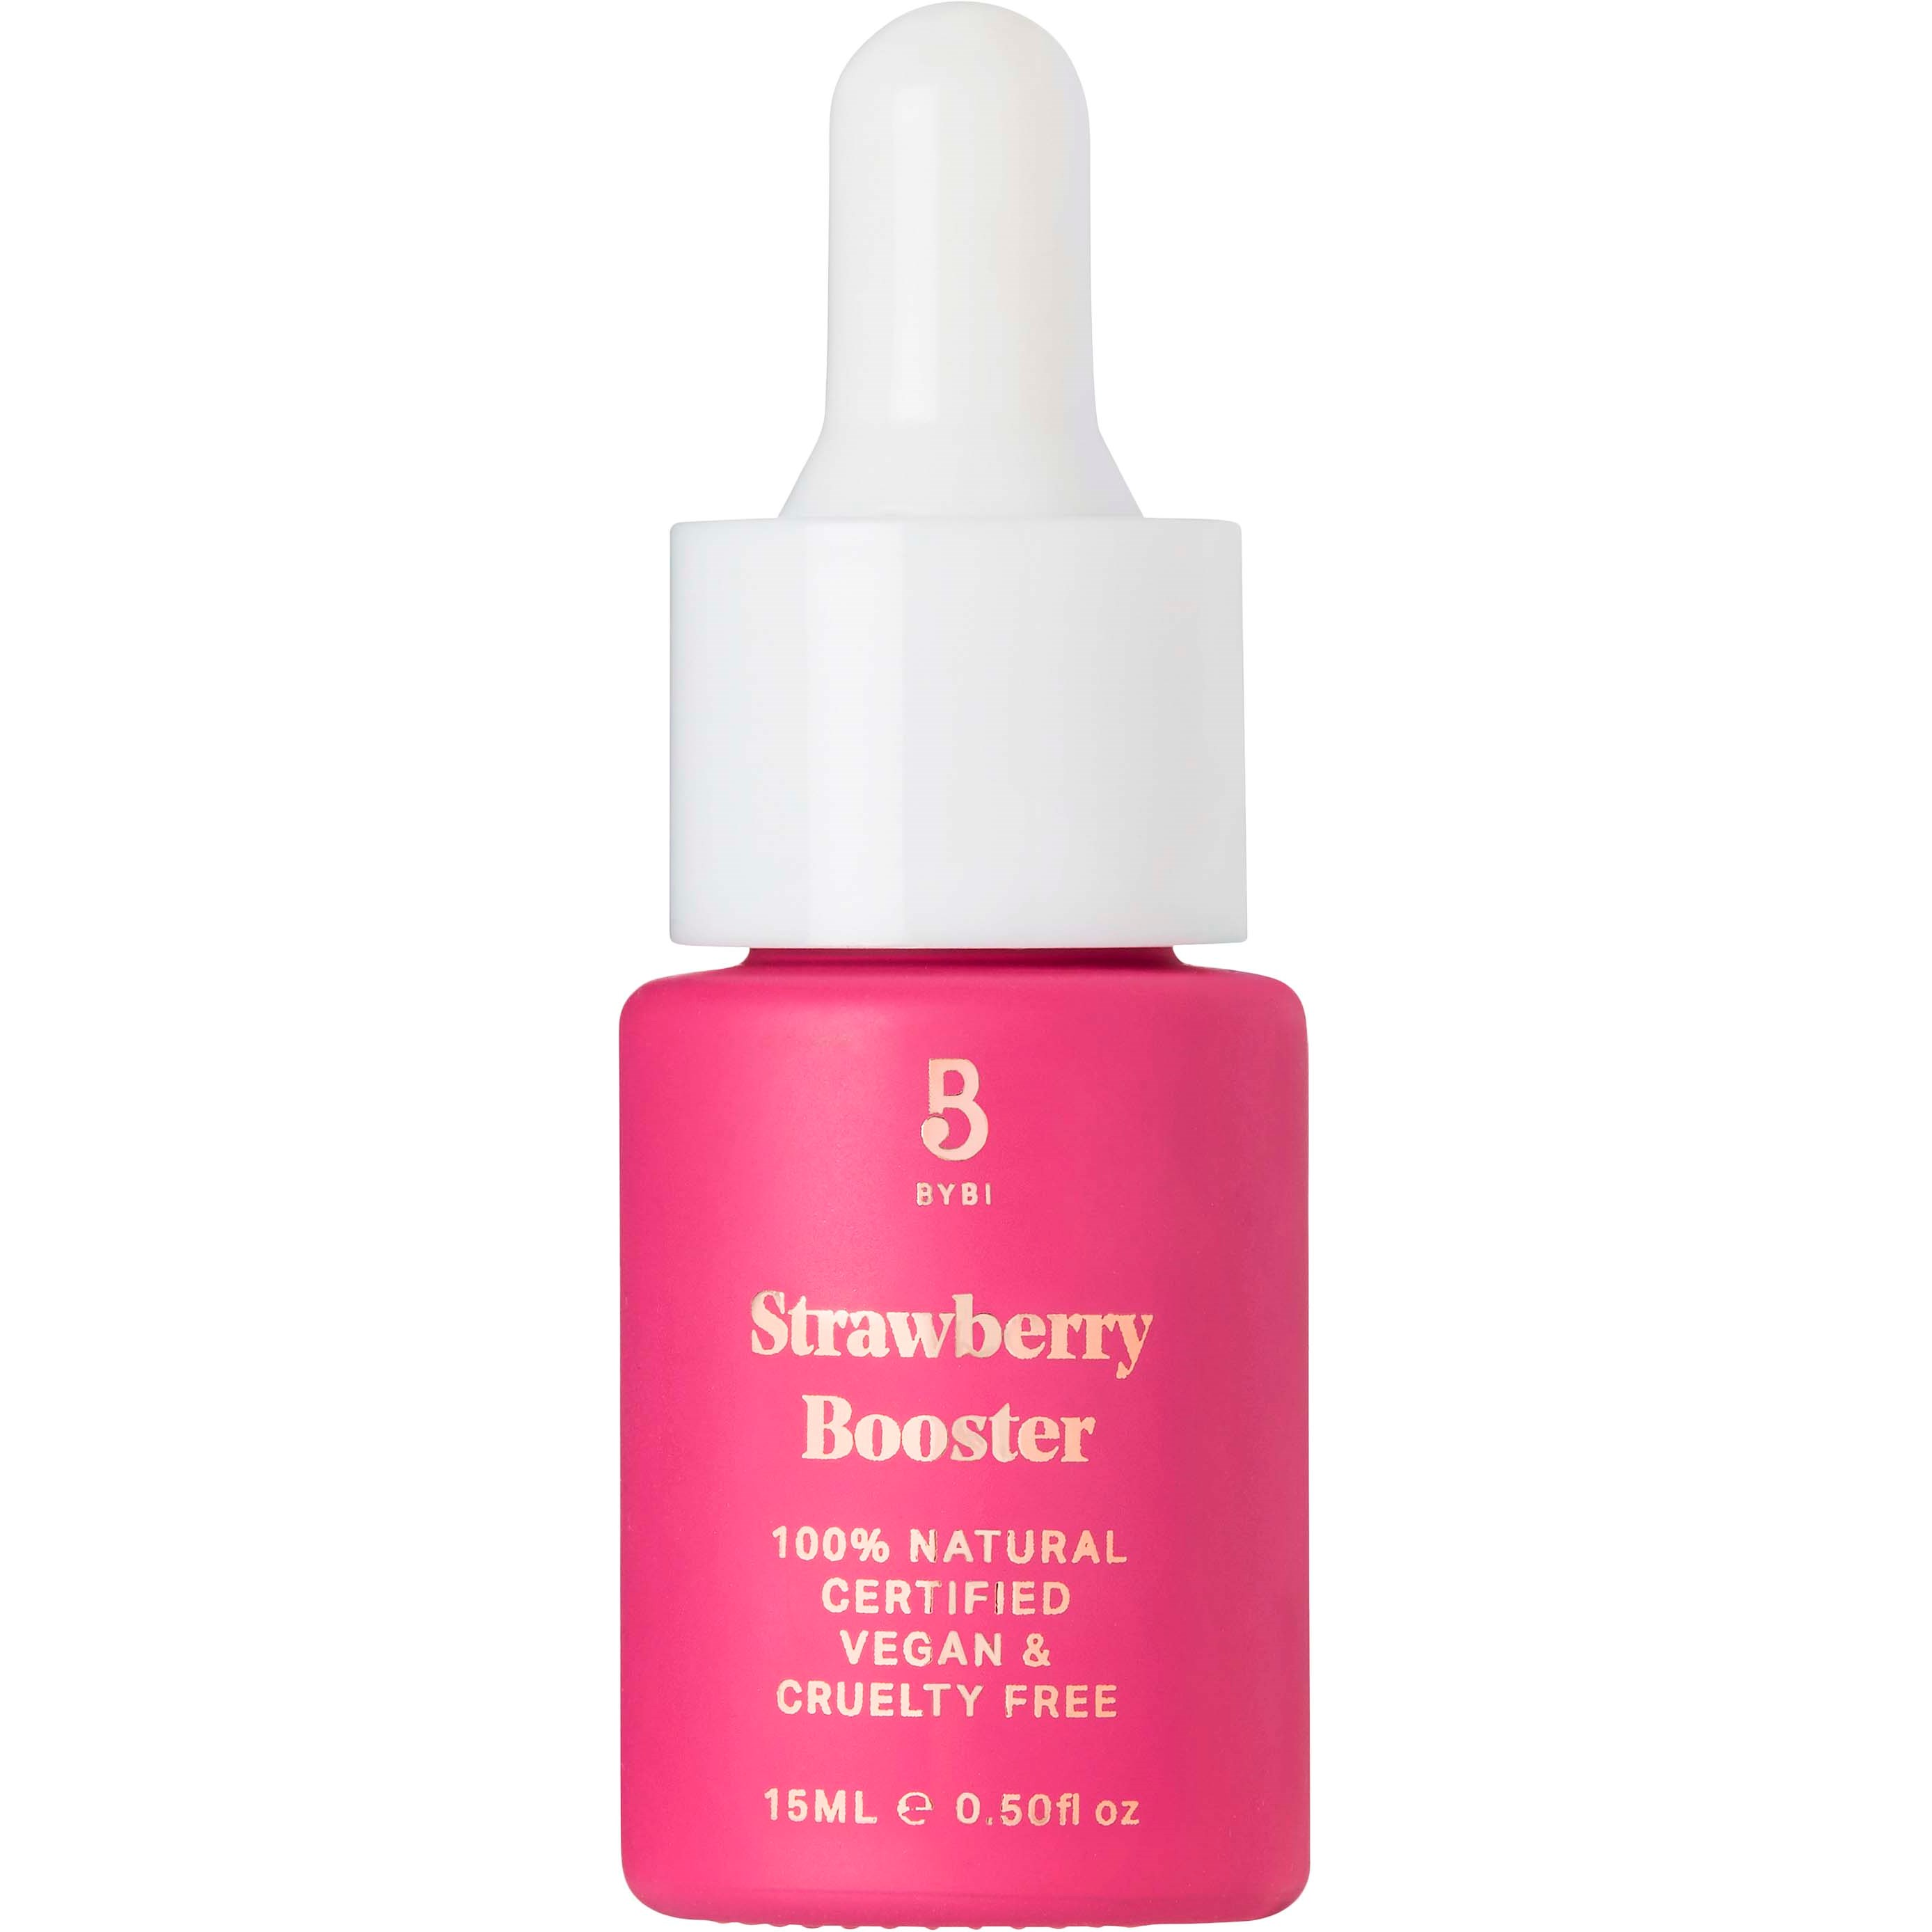 BYBI Beauty Strawberry Booster, 15 ml